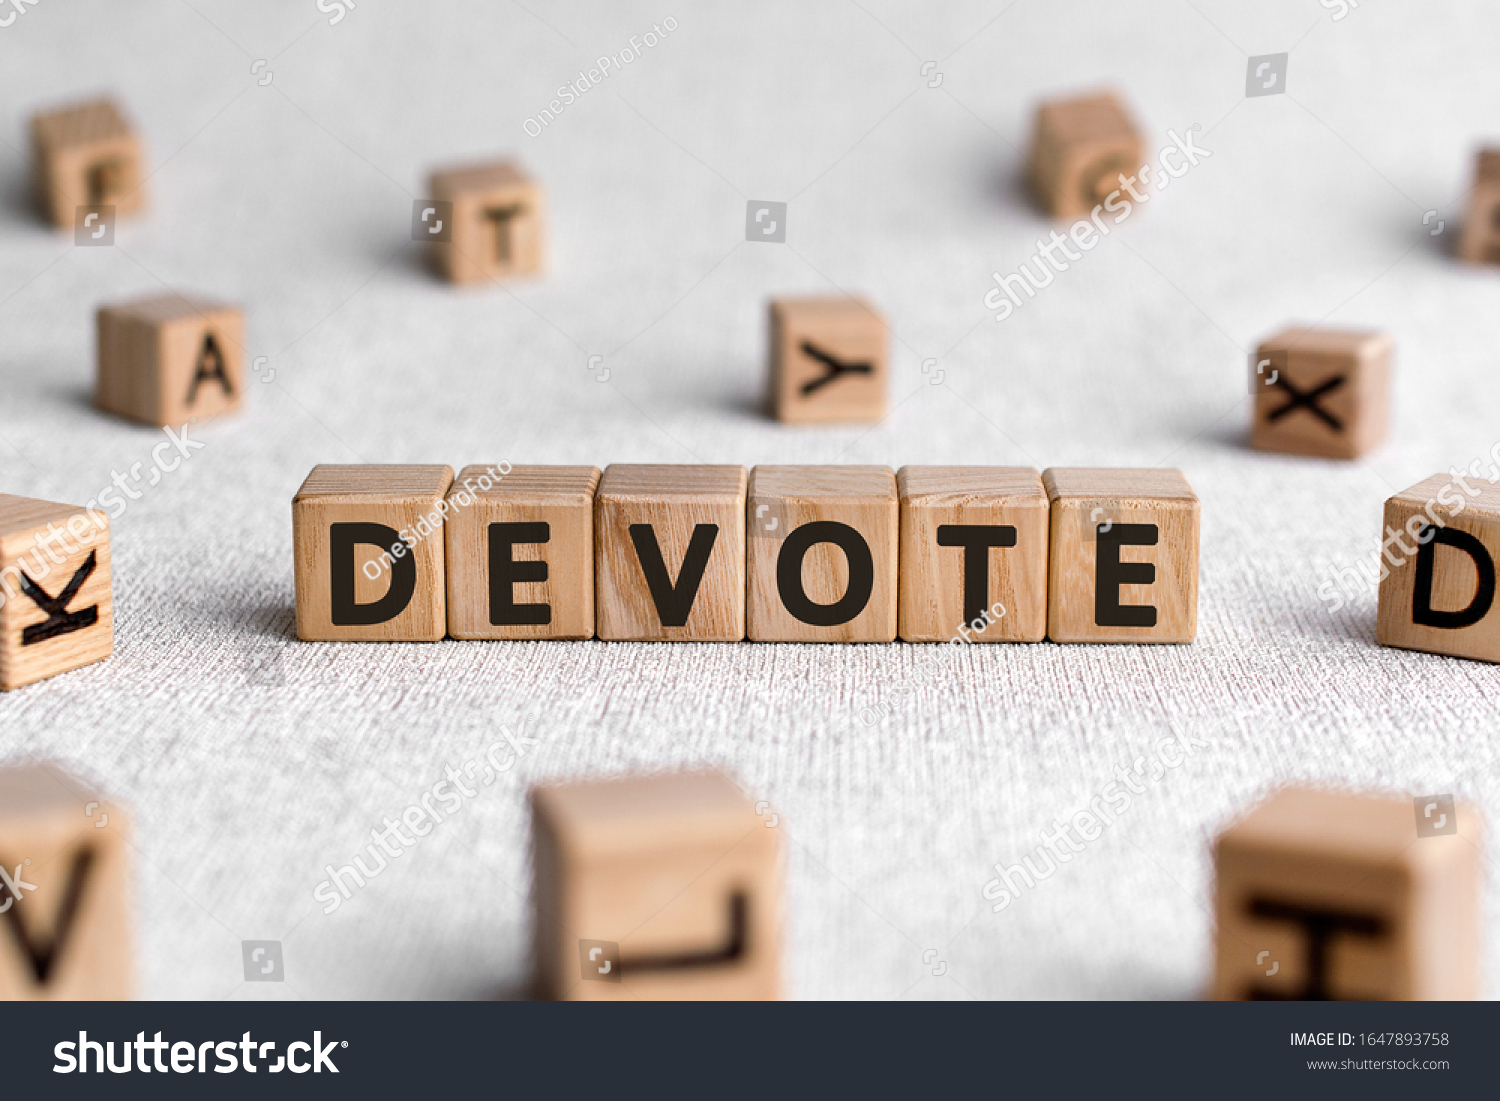 Devote - words from wooden blocks with letters, to give all of something devote concept, white background #1647893758